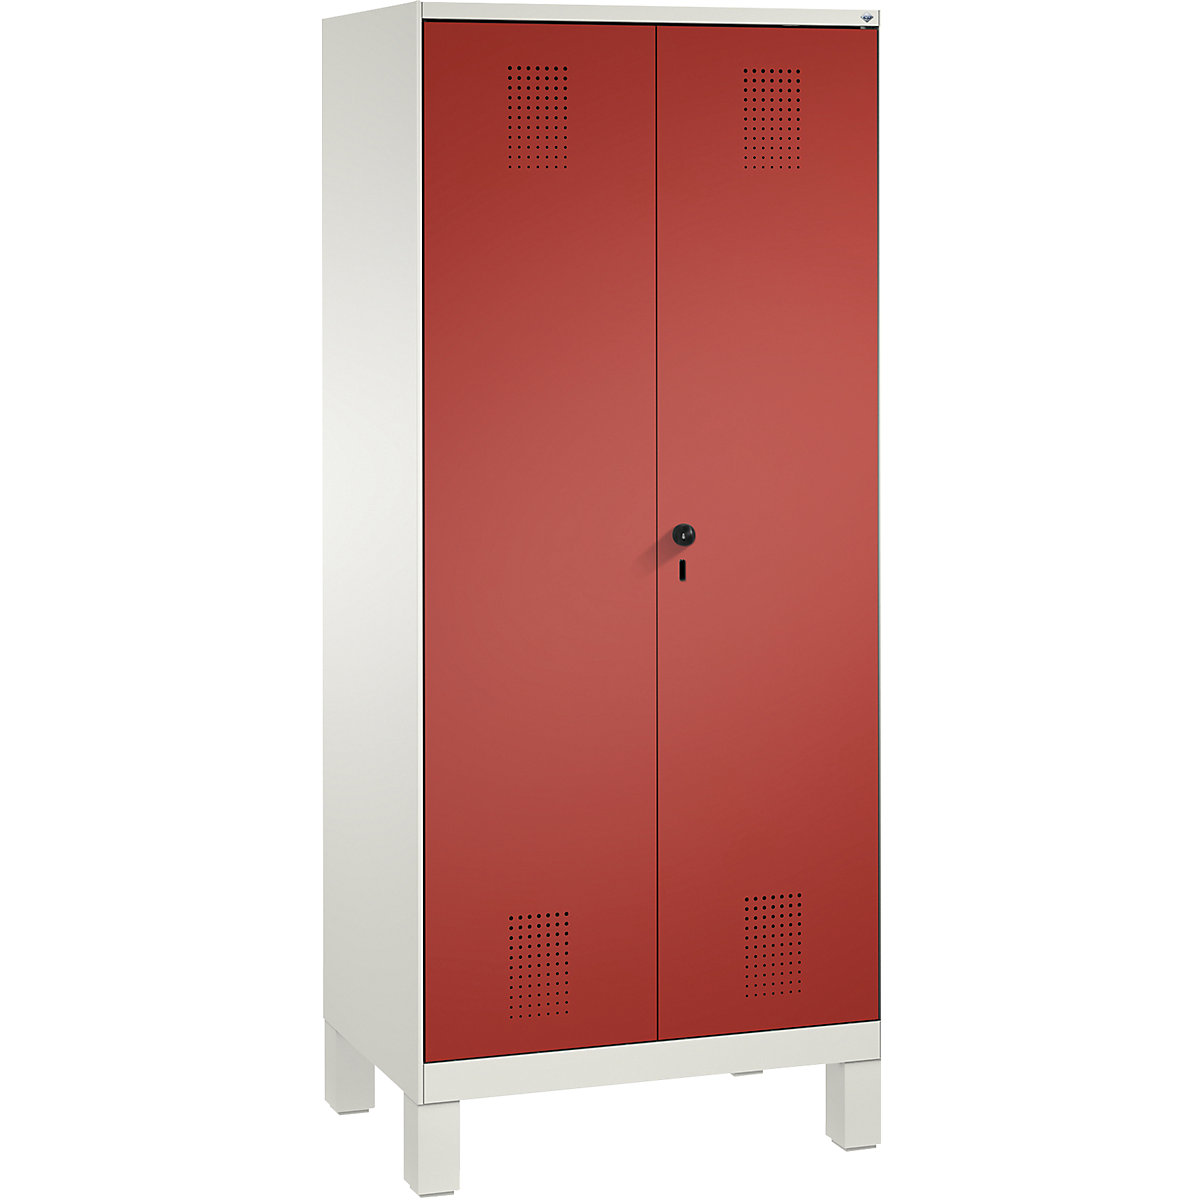 EVOLO storage cupboard, doors close in the middle, with feet – C+P, 2 compartments, 8 shelves, compartment width 400 mm, traffic white / flame red-13